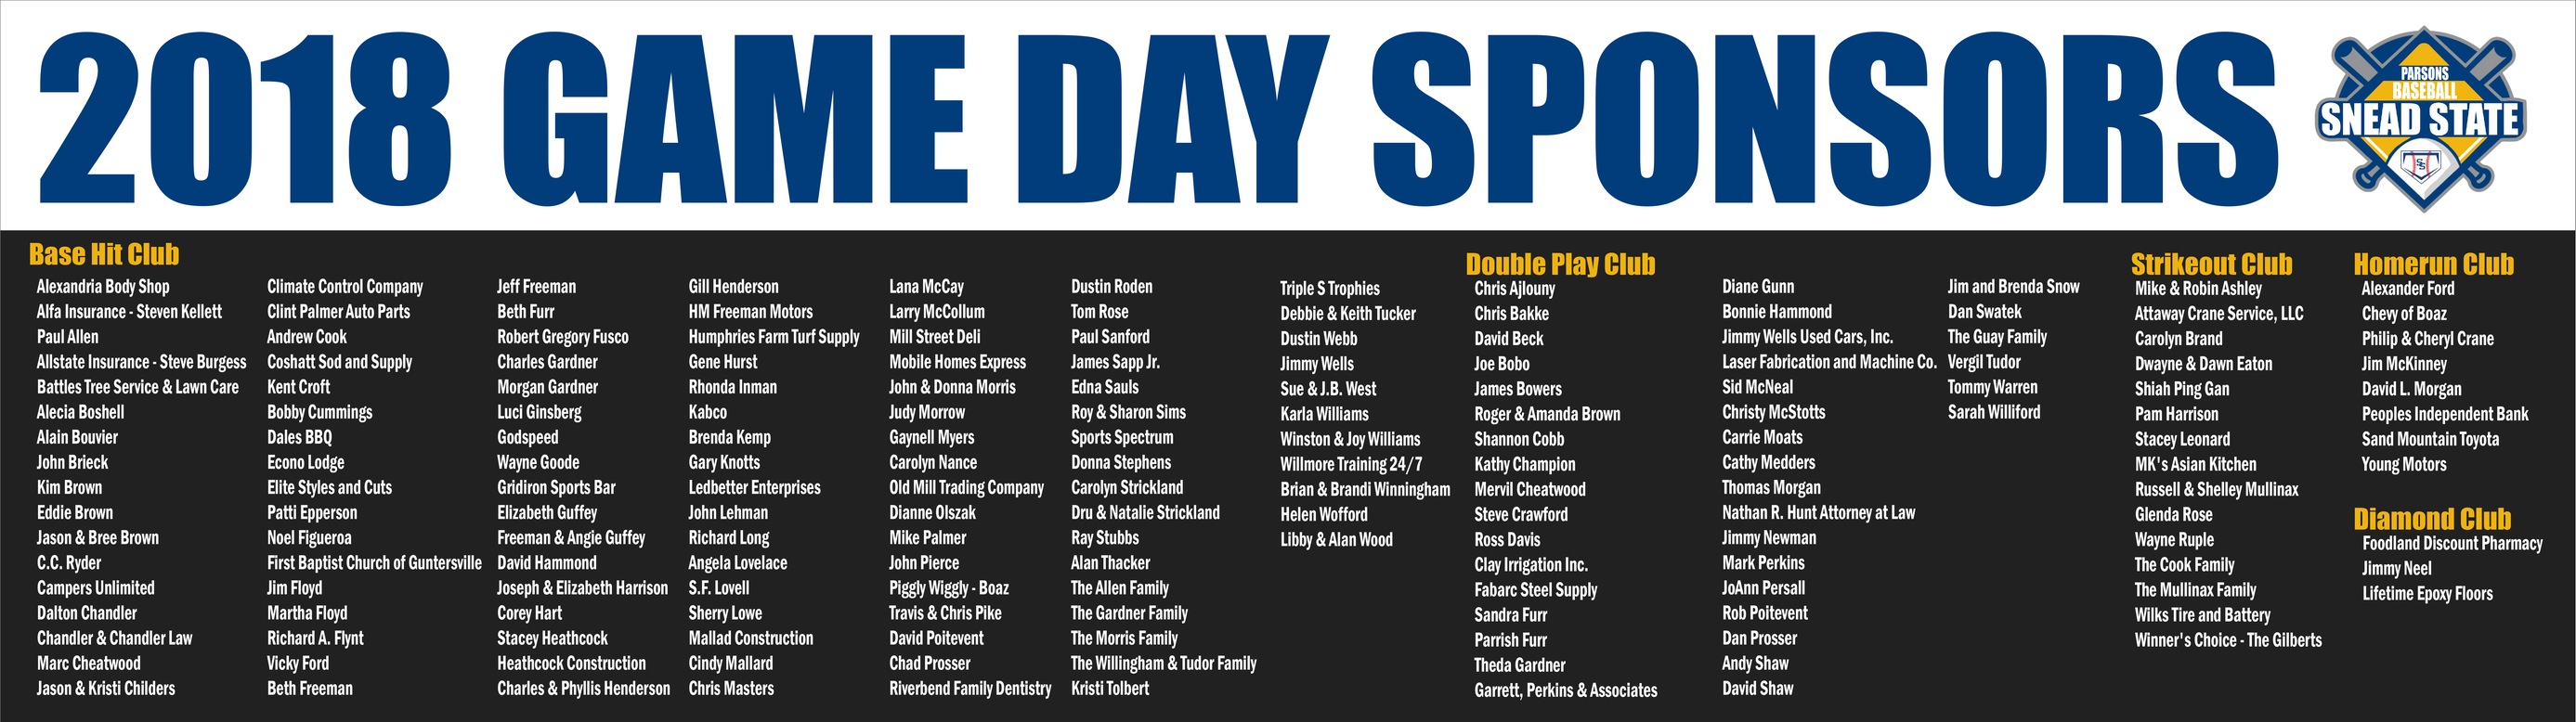 List of 2018 Game Day Sponsors